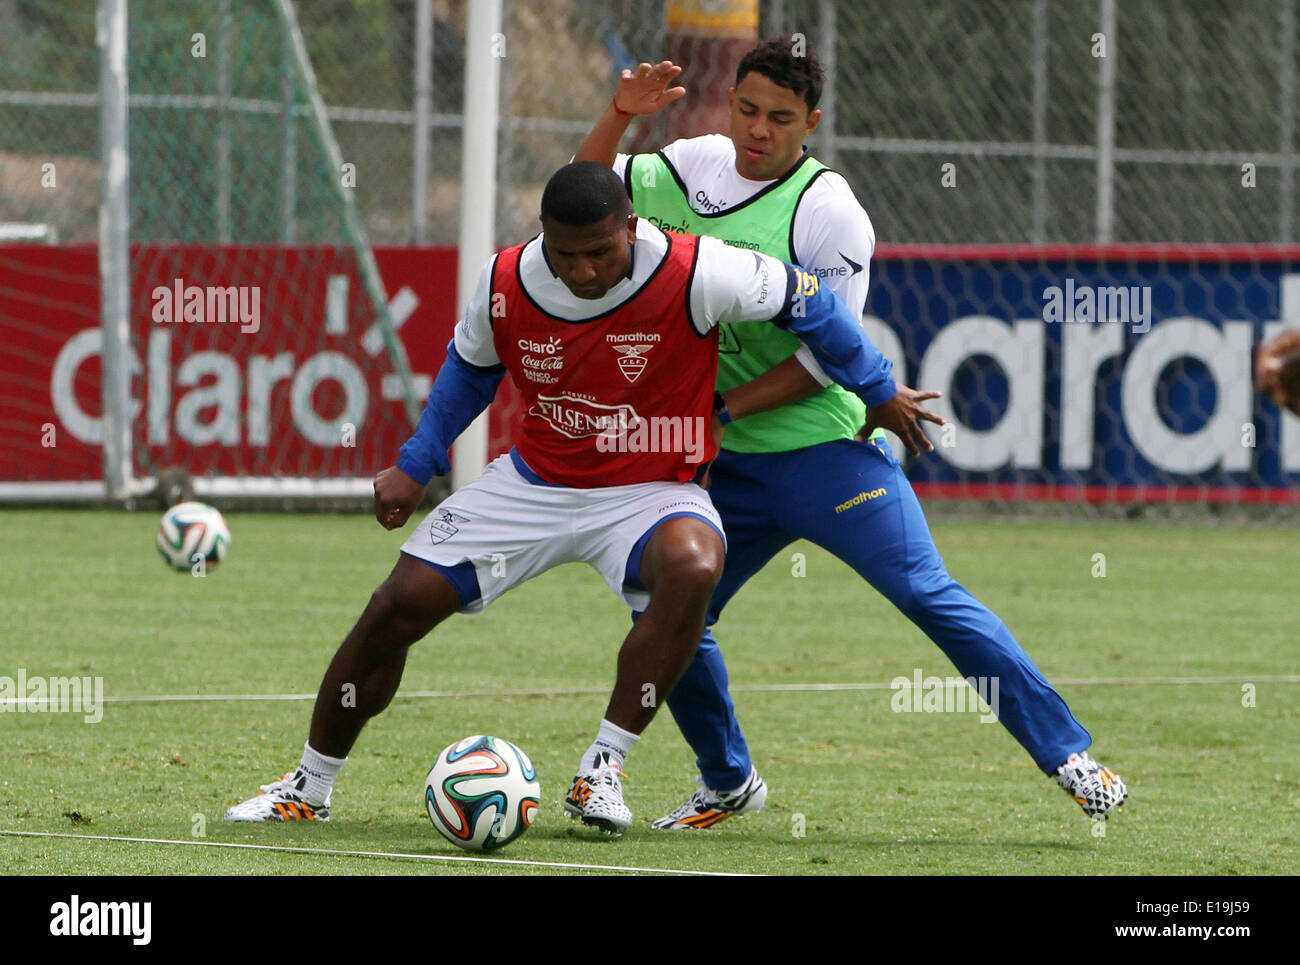 Quito, Ecuador. 27th May, 2014. Jorge Guagua (Front) and Jefferson Montero of Ecuador's national soccer team take part in a training session at the 'Casa de la Seleccion' in Quito, capital of Ecuador, May 27, 2014. Ecuador is preparing for its friendly matches against Mexico and England, in the U.S., before the Brazil 2014 FIFA World Cup. Credit:  Santiago Armas/Xinhua/Alamy Live News Stock Photo